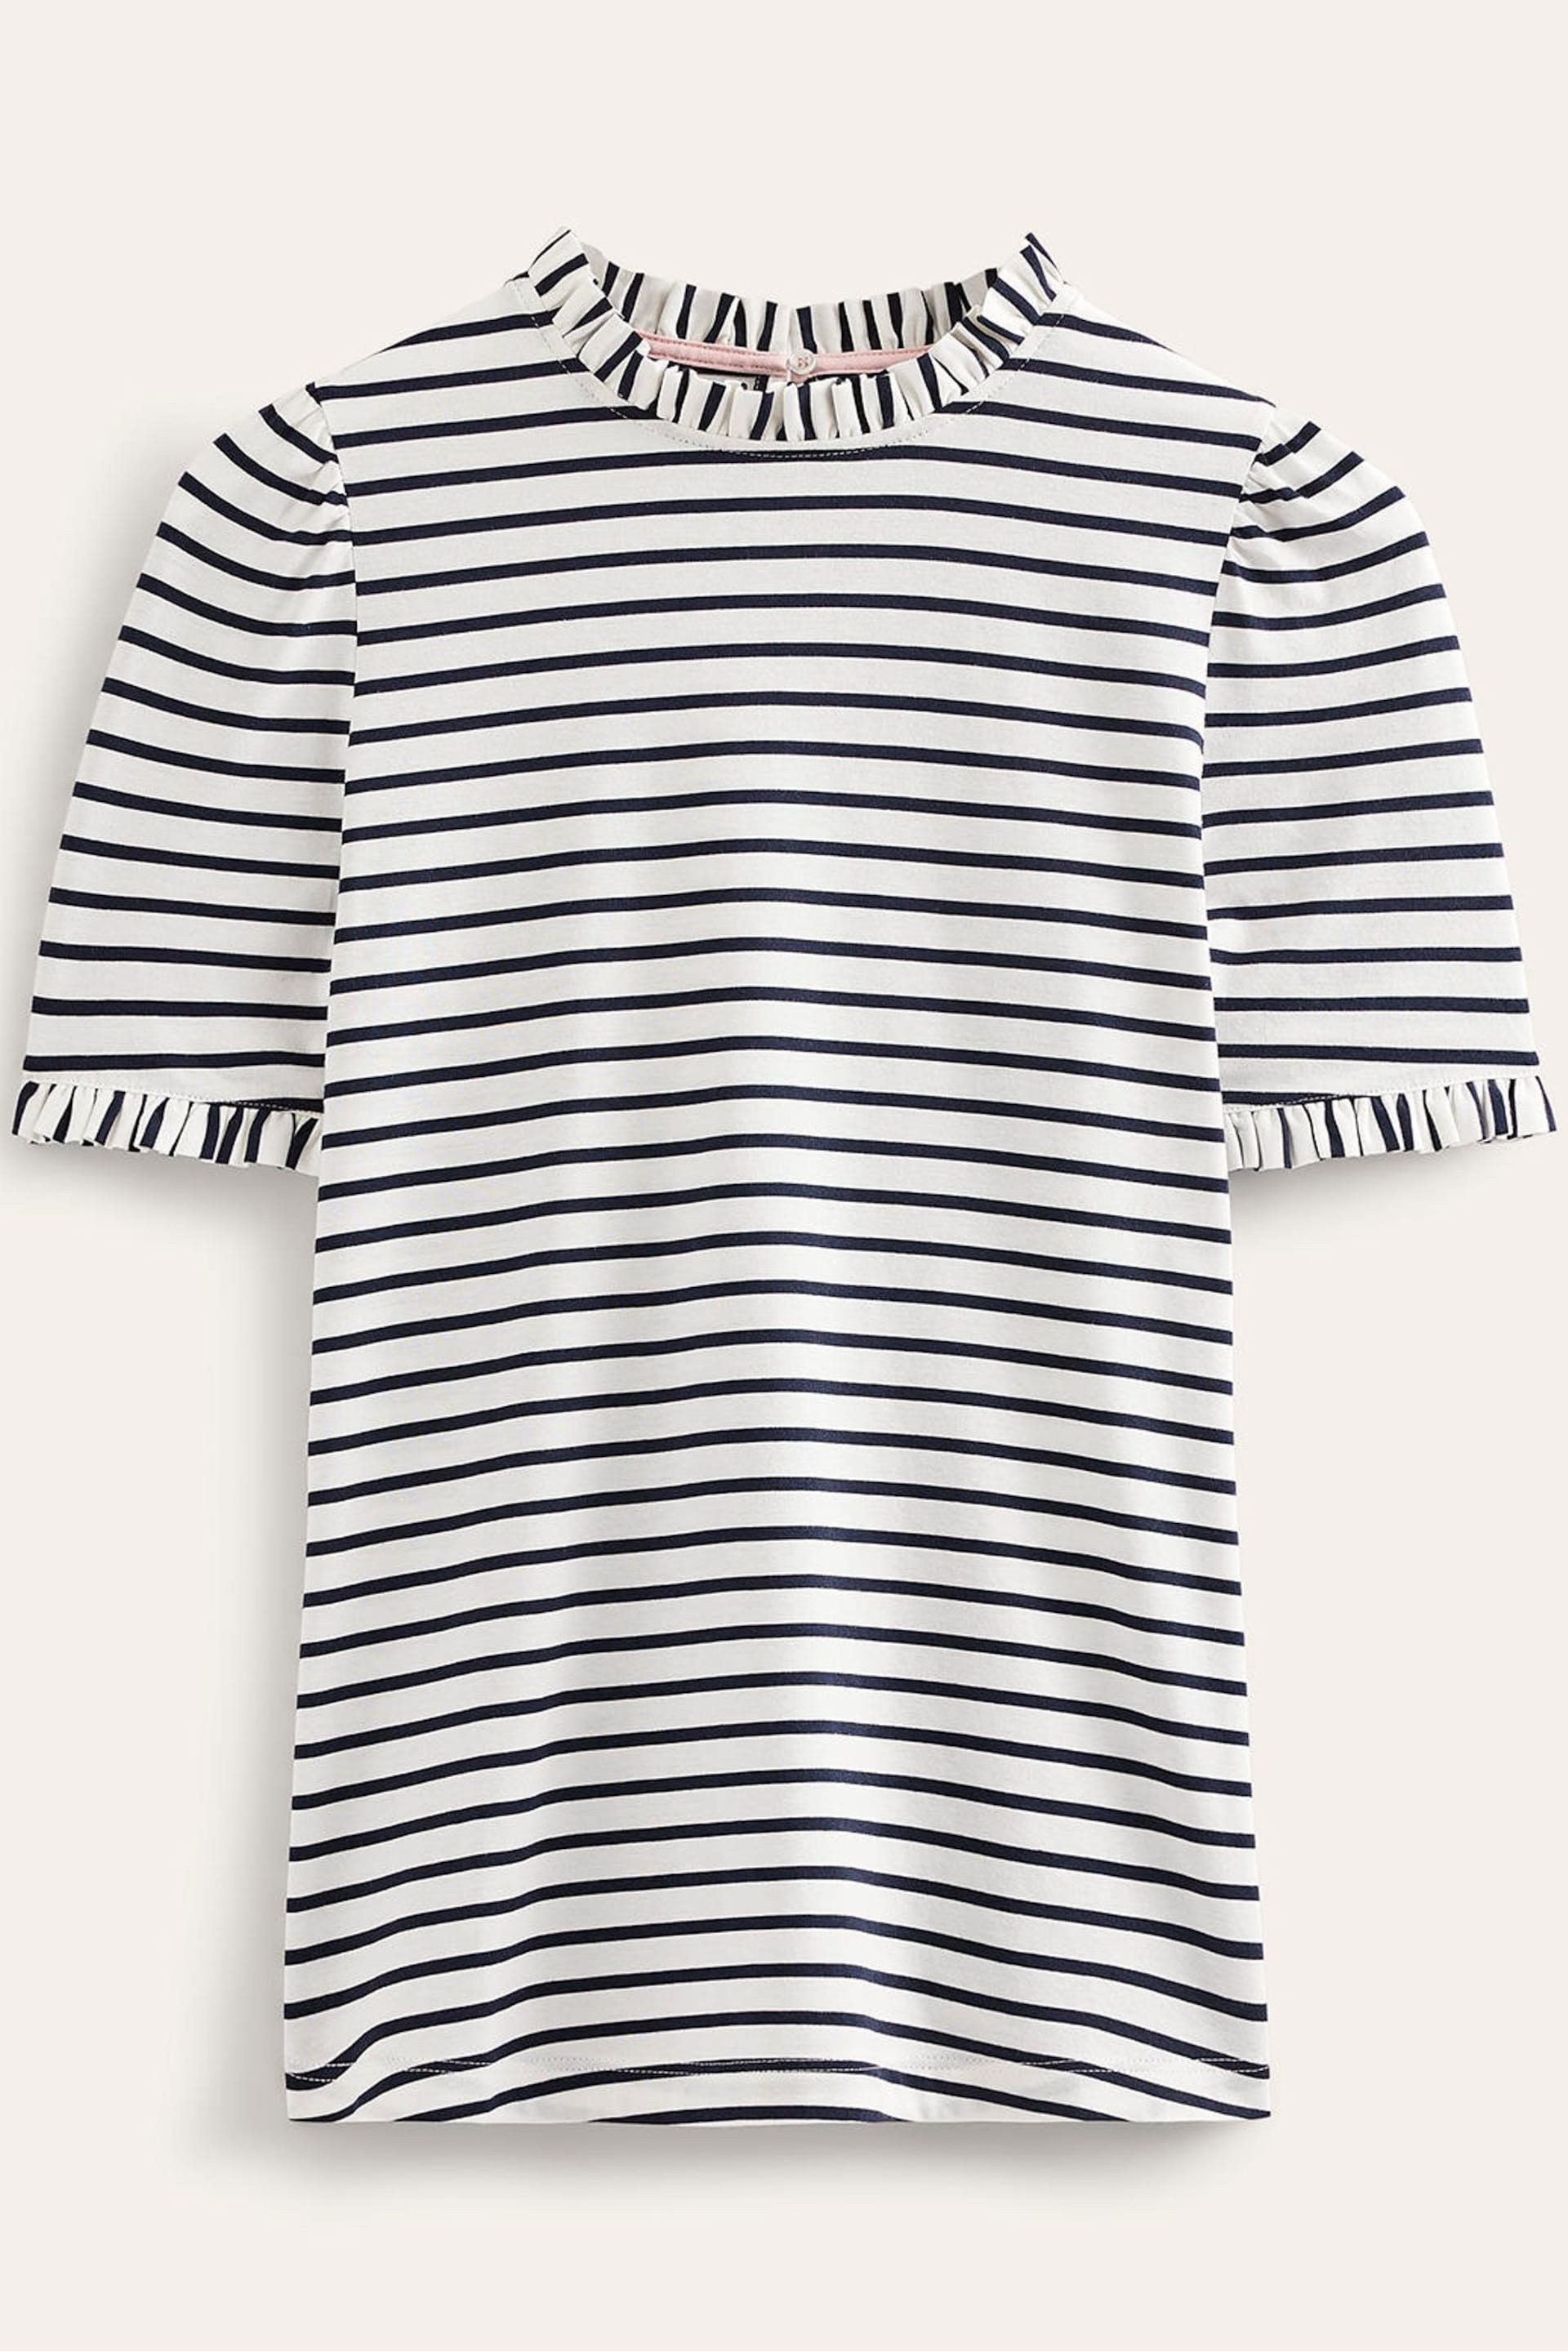 Boden Blue Supersoft Frill Detail T-Shirt - Image 5 of 5